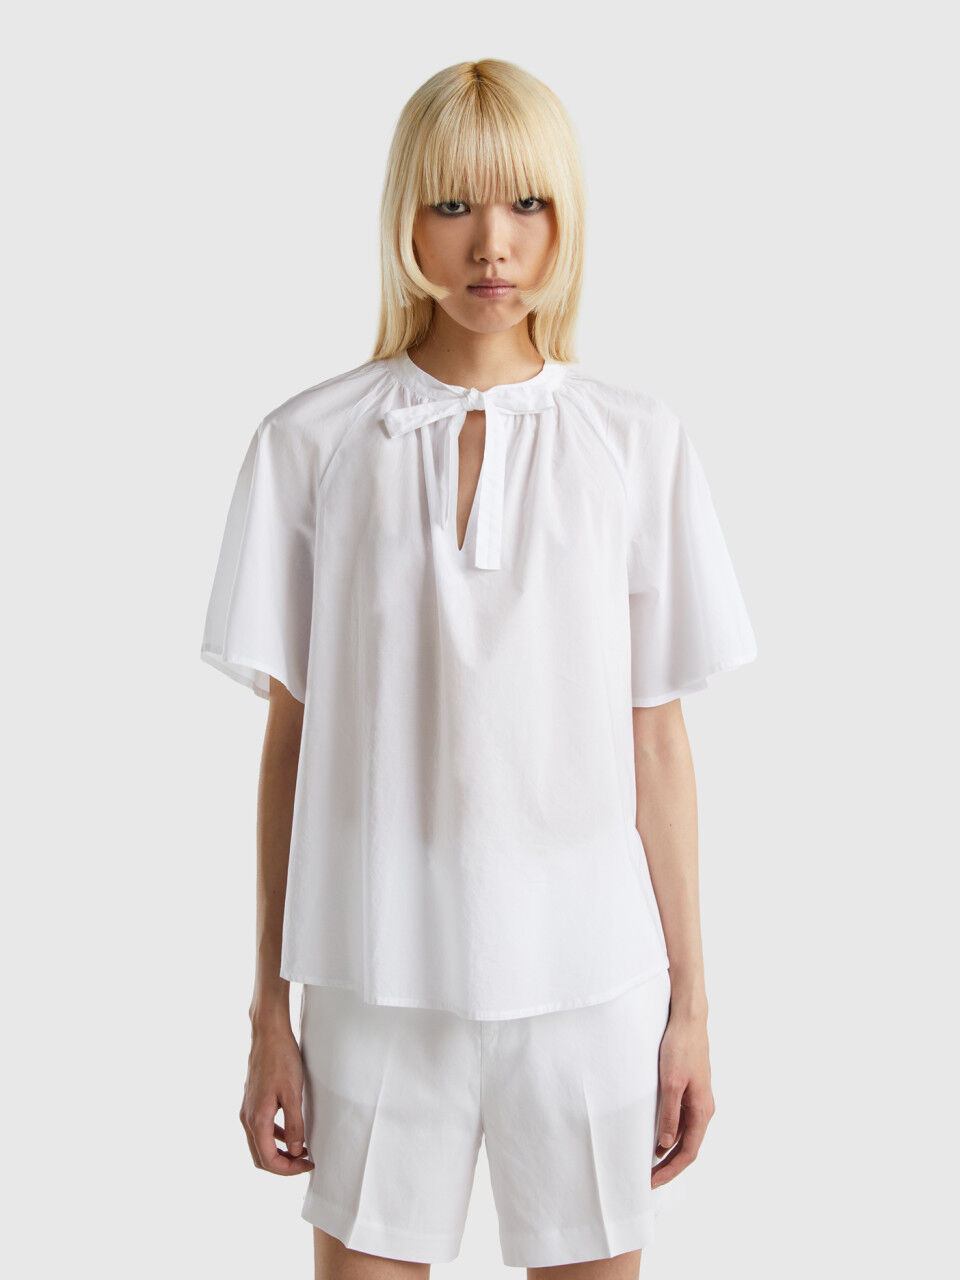 Women's Shirts and Blouses New Collection 2023 | Benetton